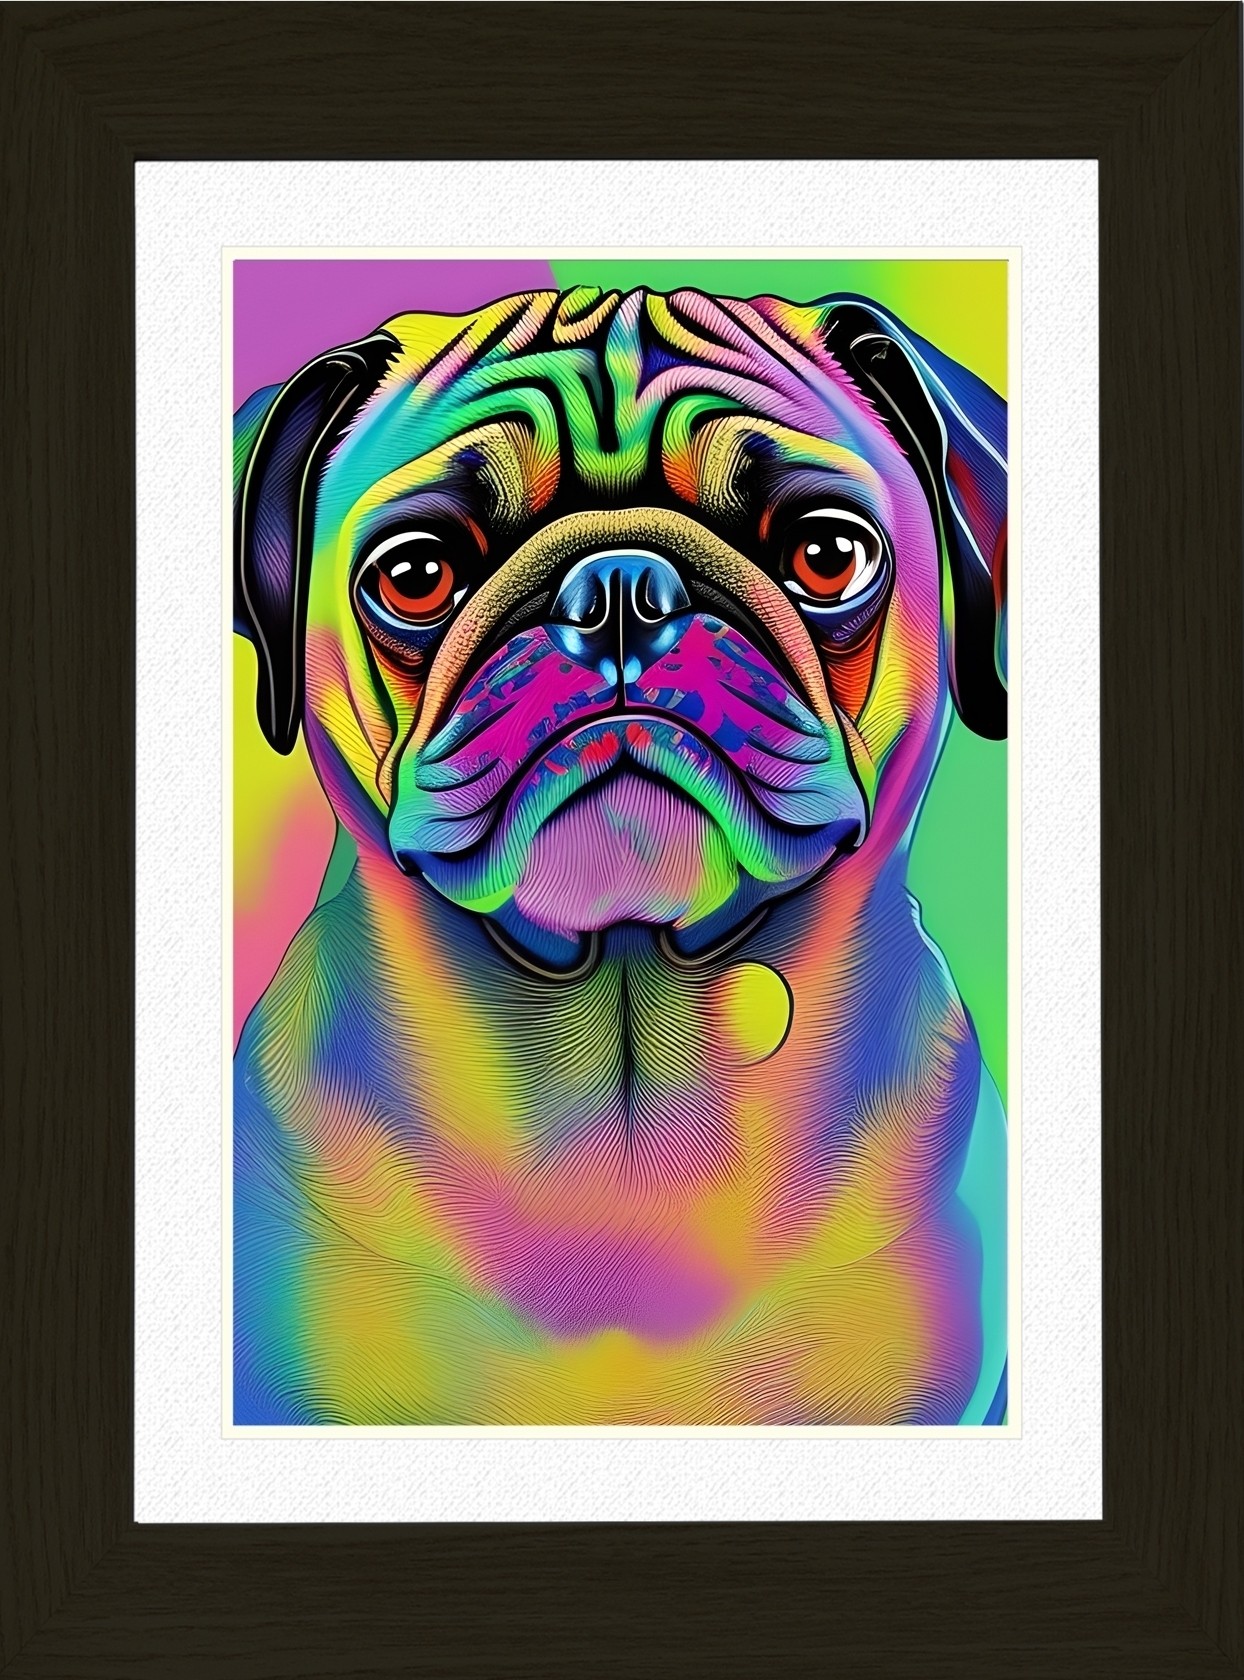 Pug Dog Picture Framed Colourful Abstract Art (A3 Black Frame)